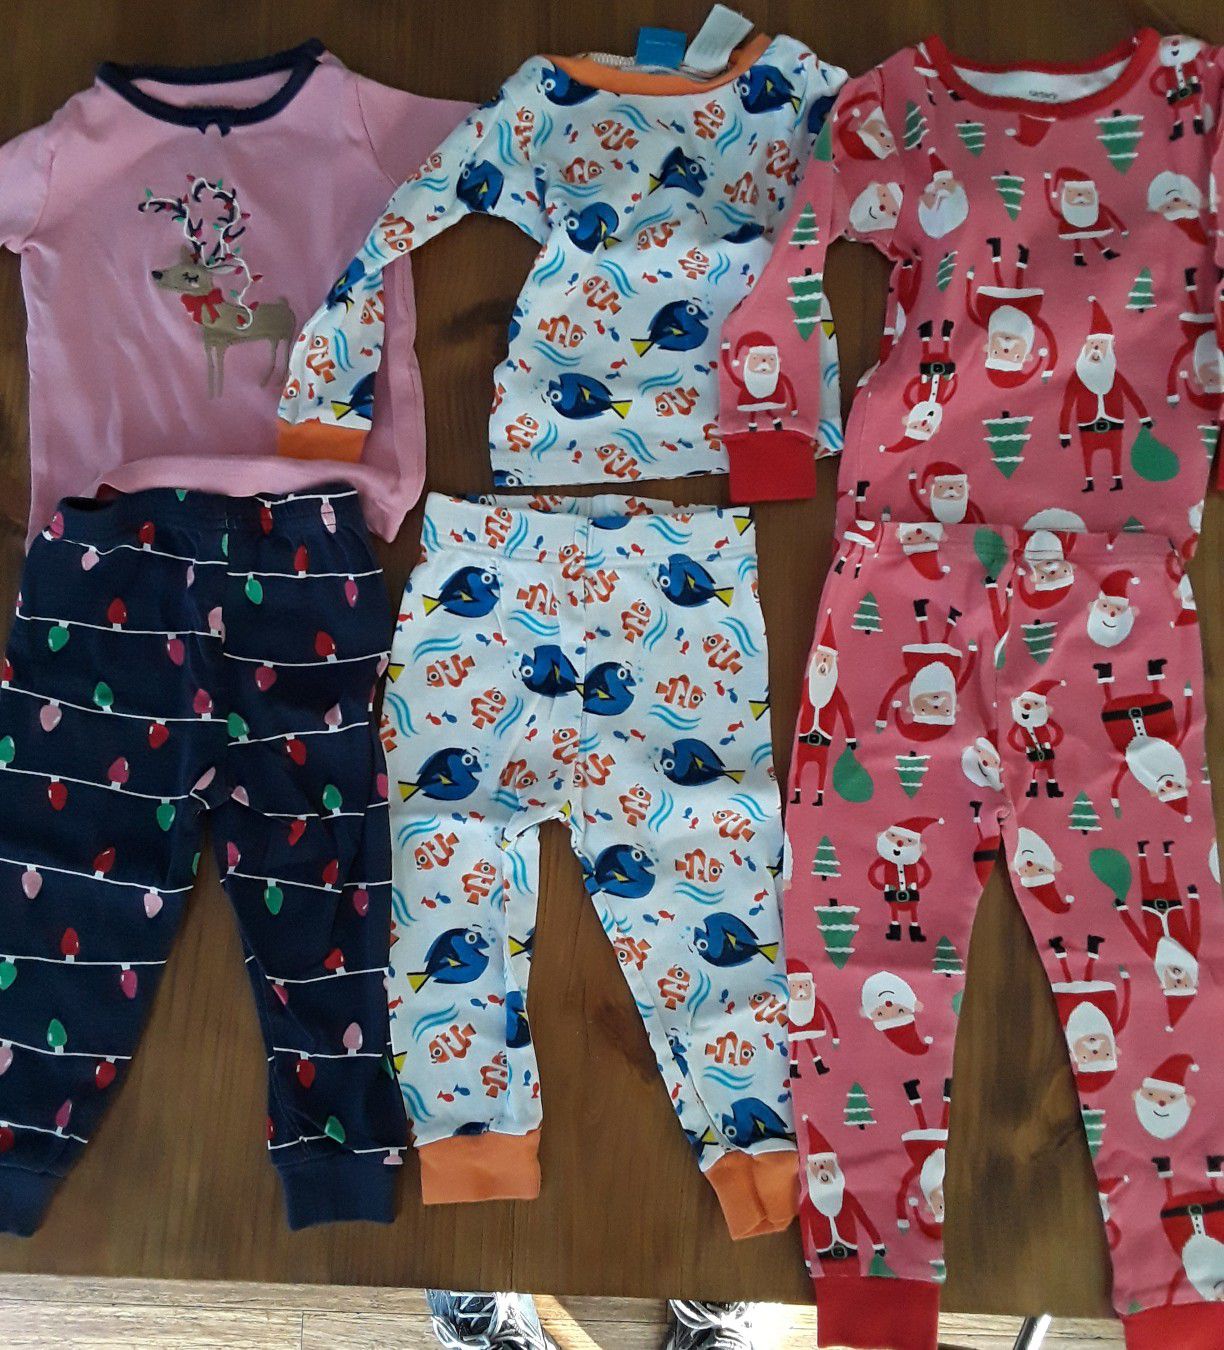 Baby and Toddler clothes and toys six months to 4t $2 each